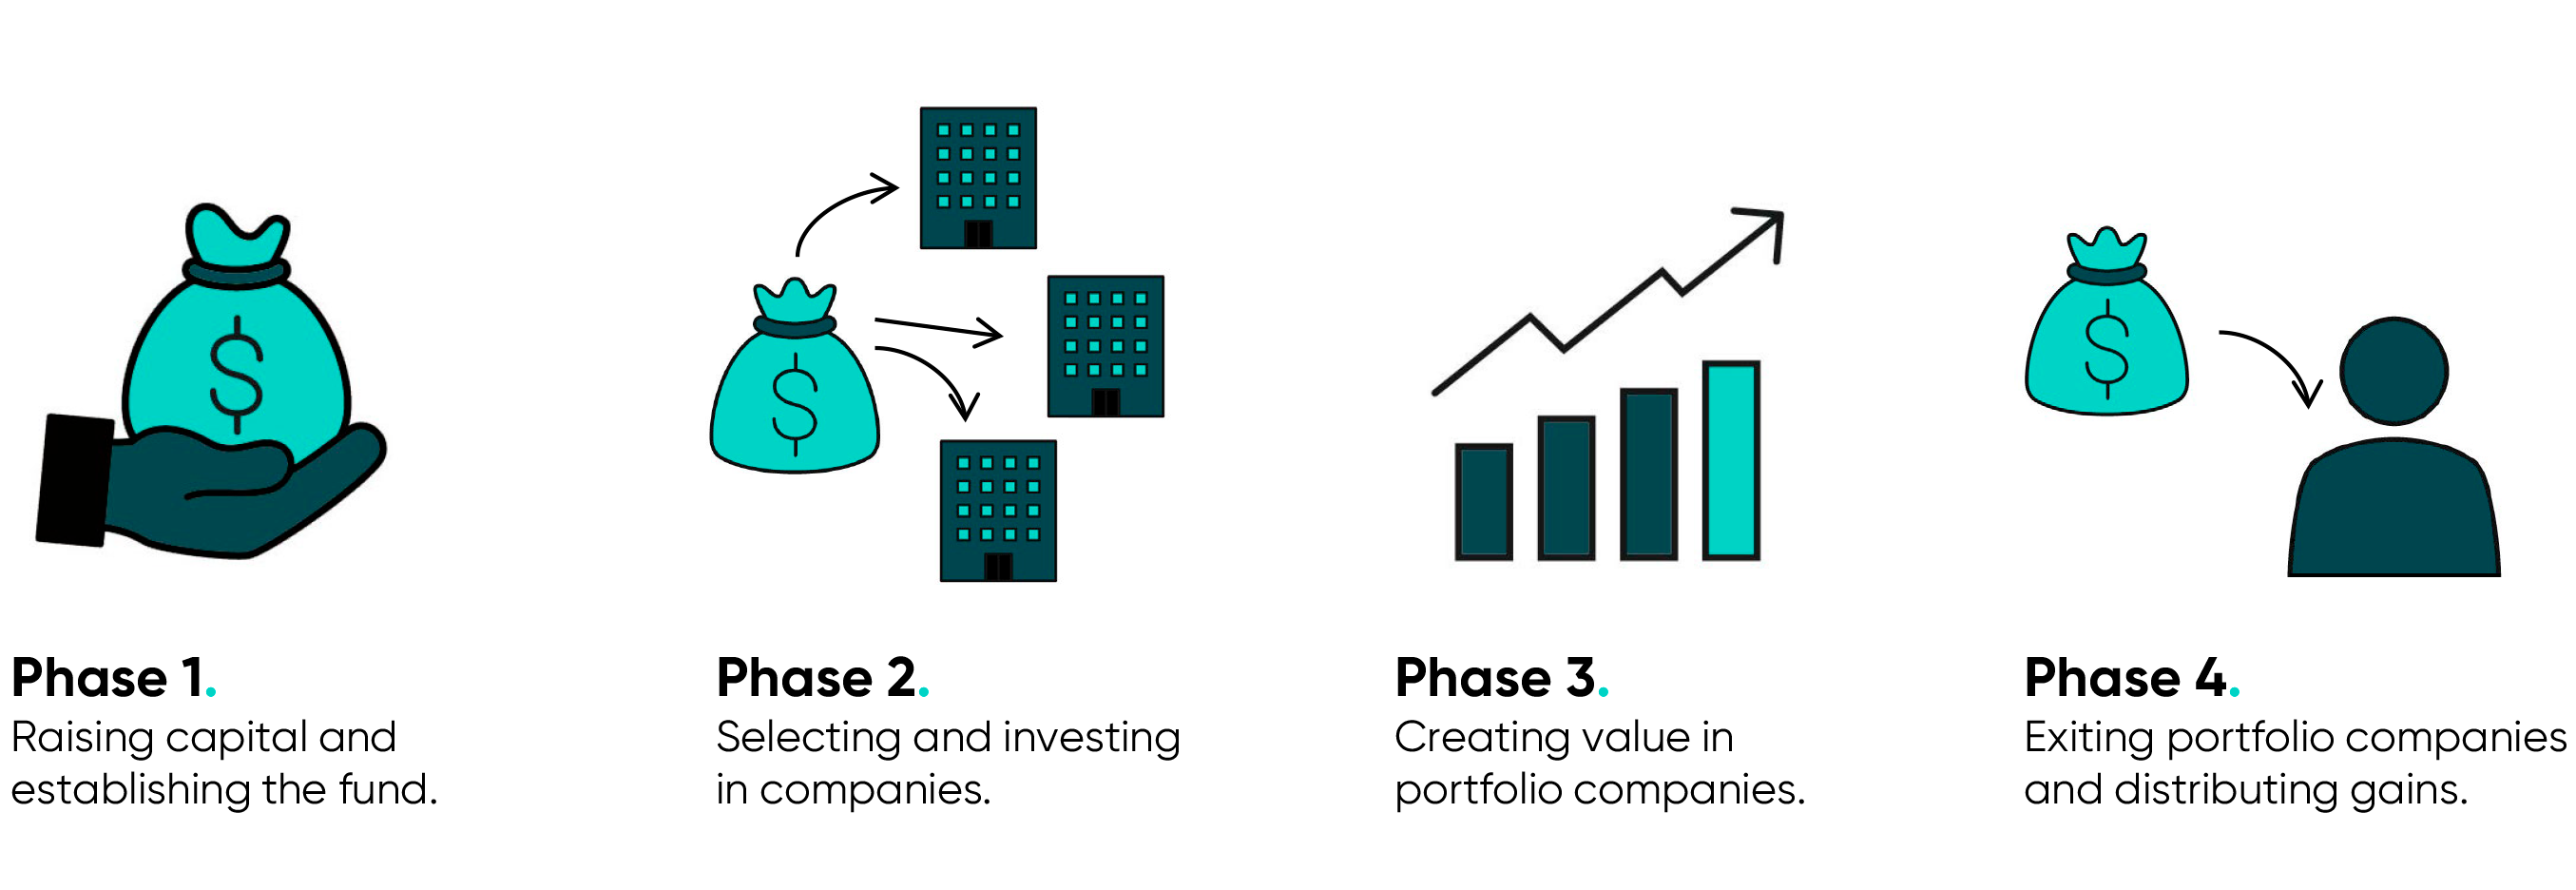 The life cycle of a private equity fund